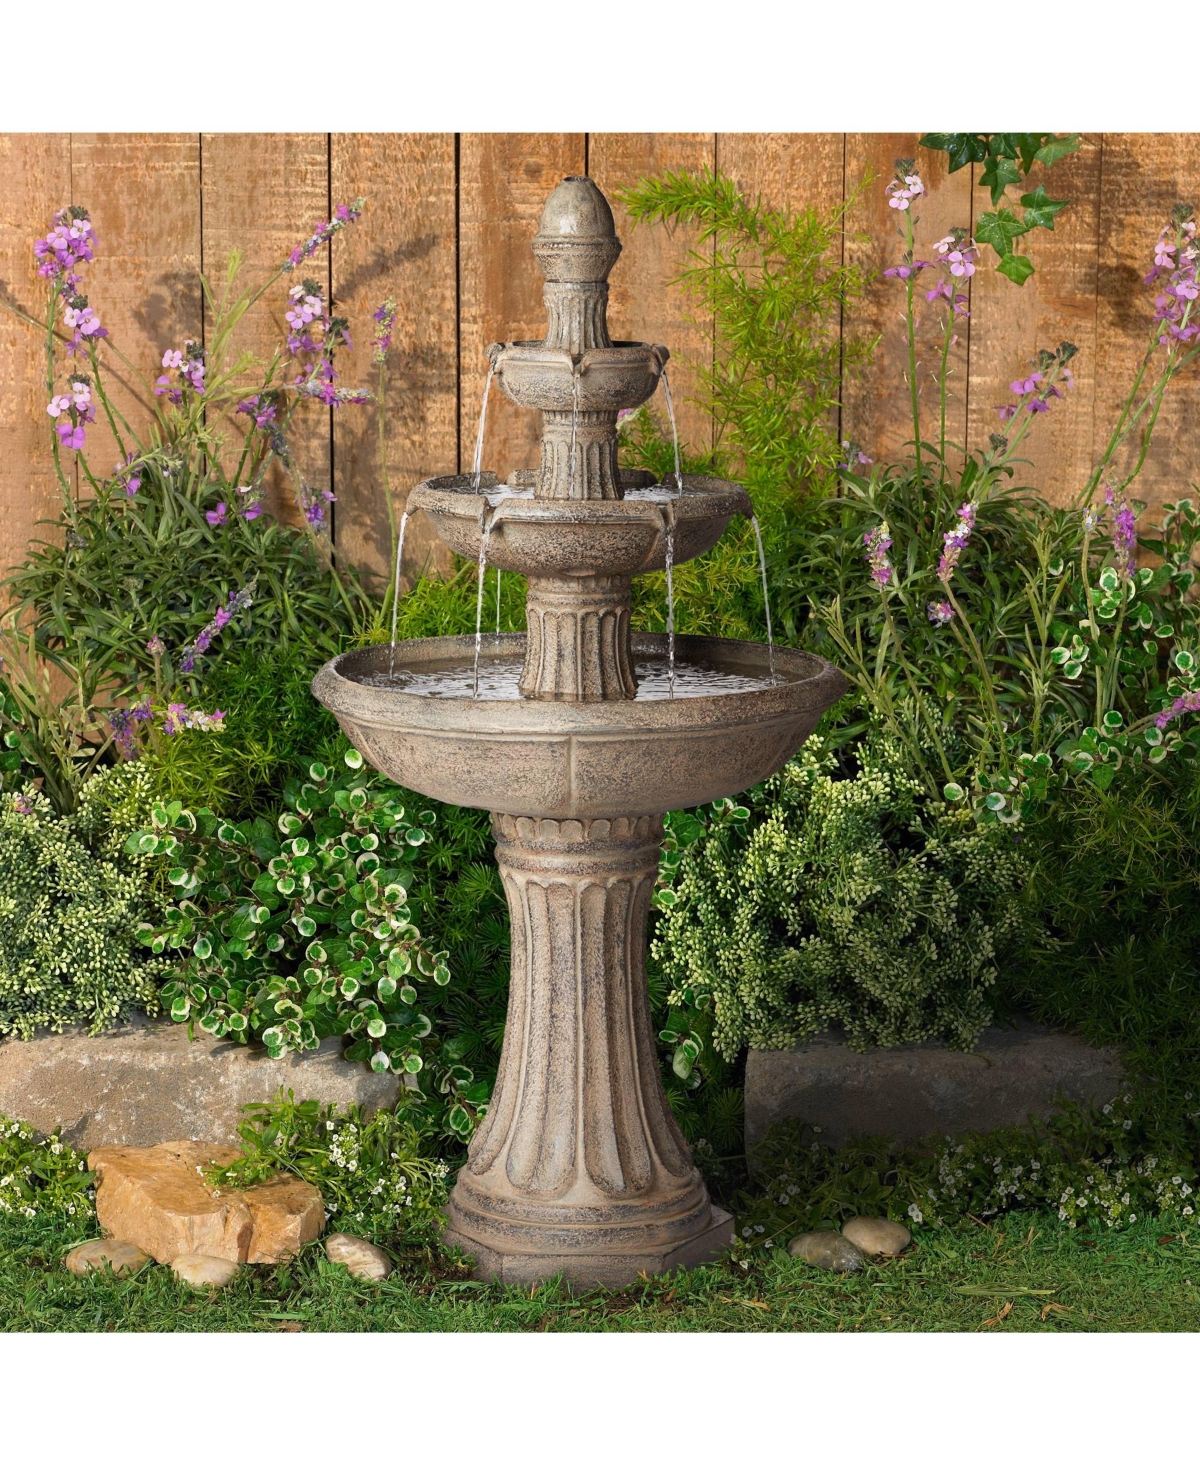 Arron Rustic Outdoor Floor Water Fountain 46" High with Light Led 3-Tiered for Garden Patio Yard Deck Home Lawn Porch House Relaxation Exterior Balcon